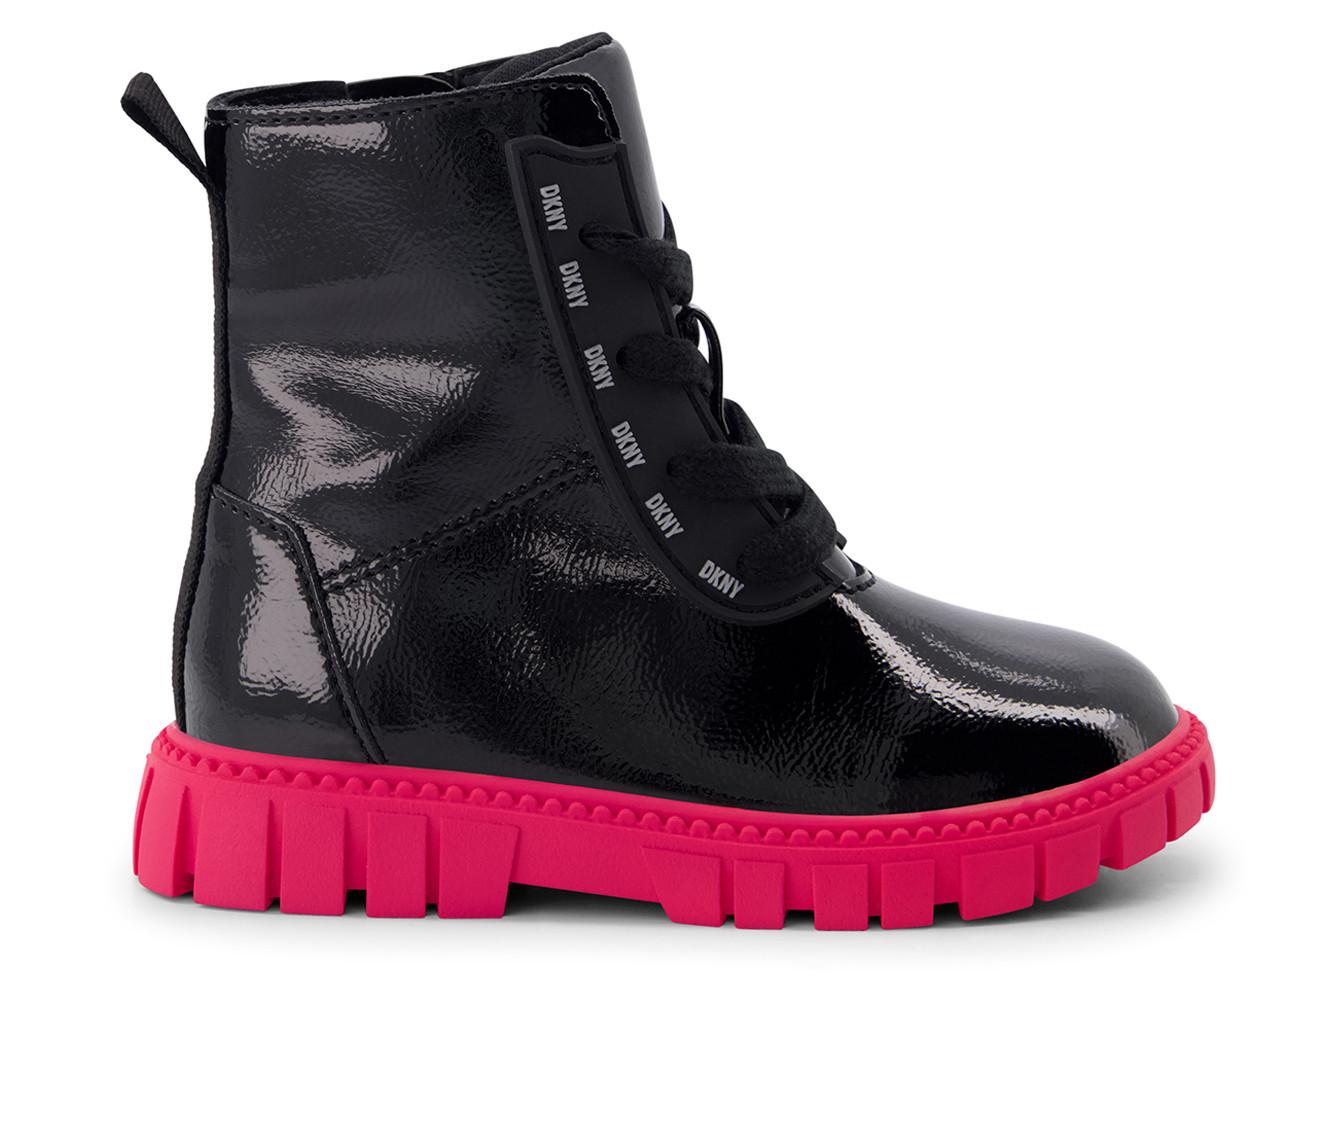 Girls' DKNY Toddler Carrie Combat Boots